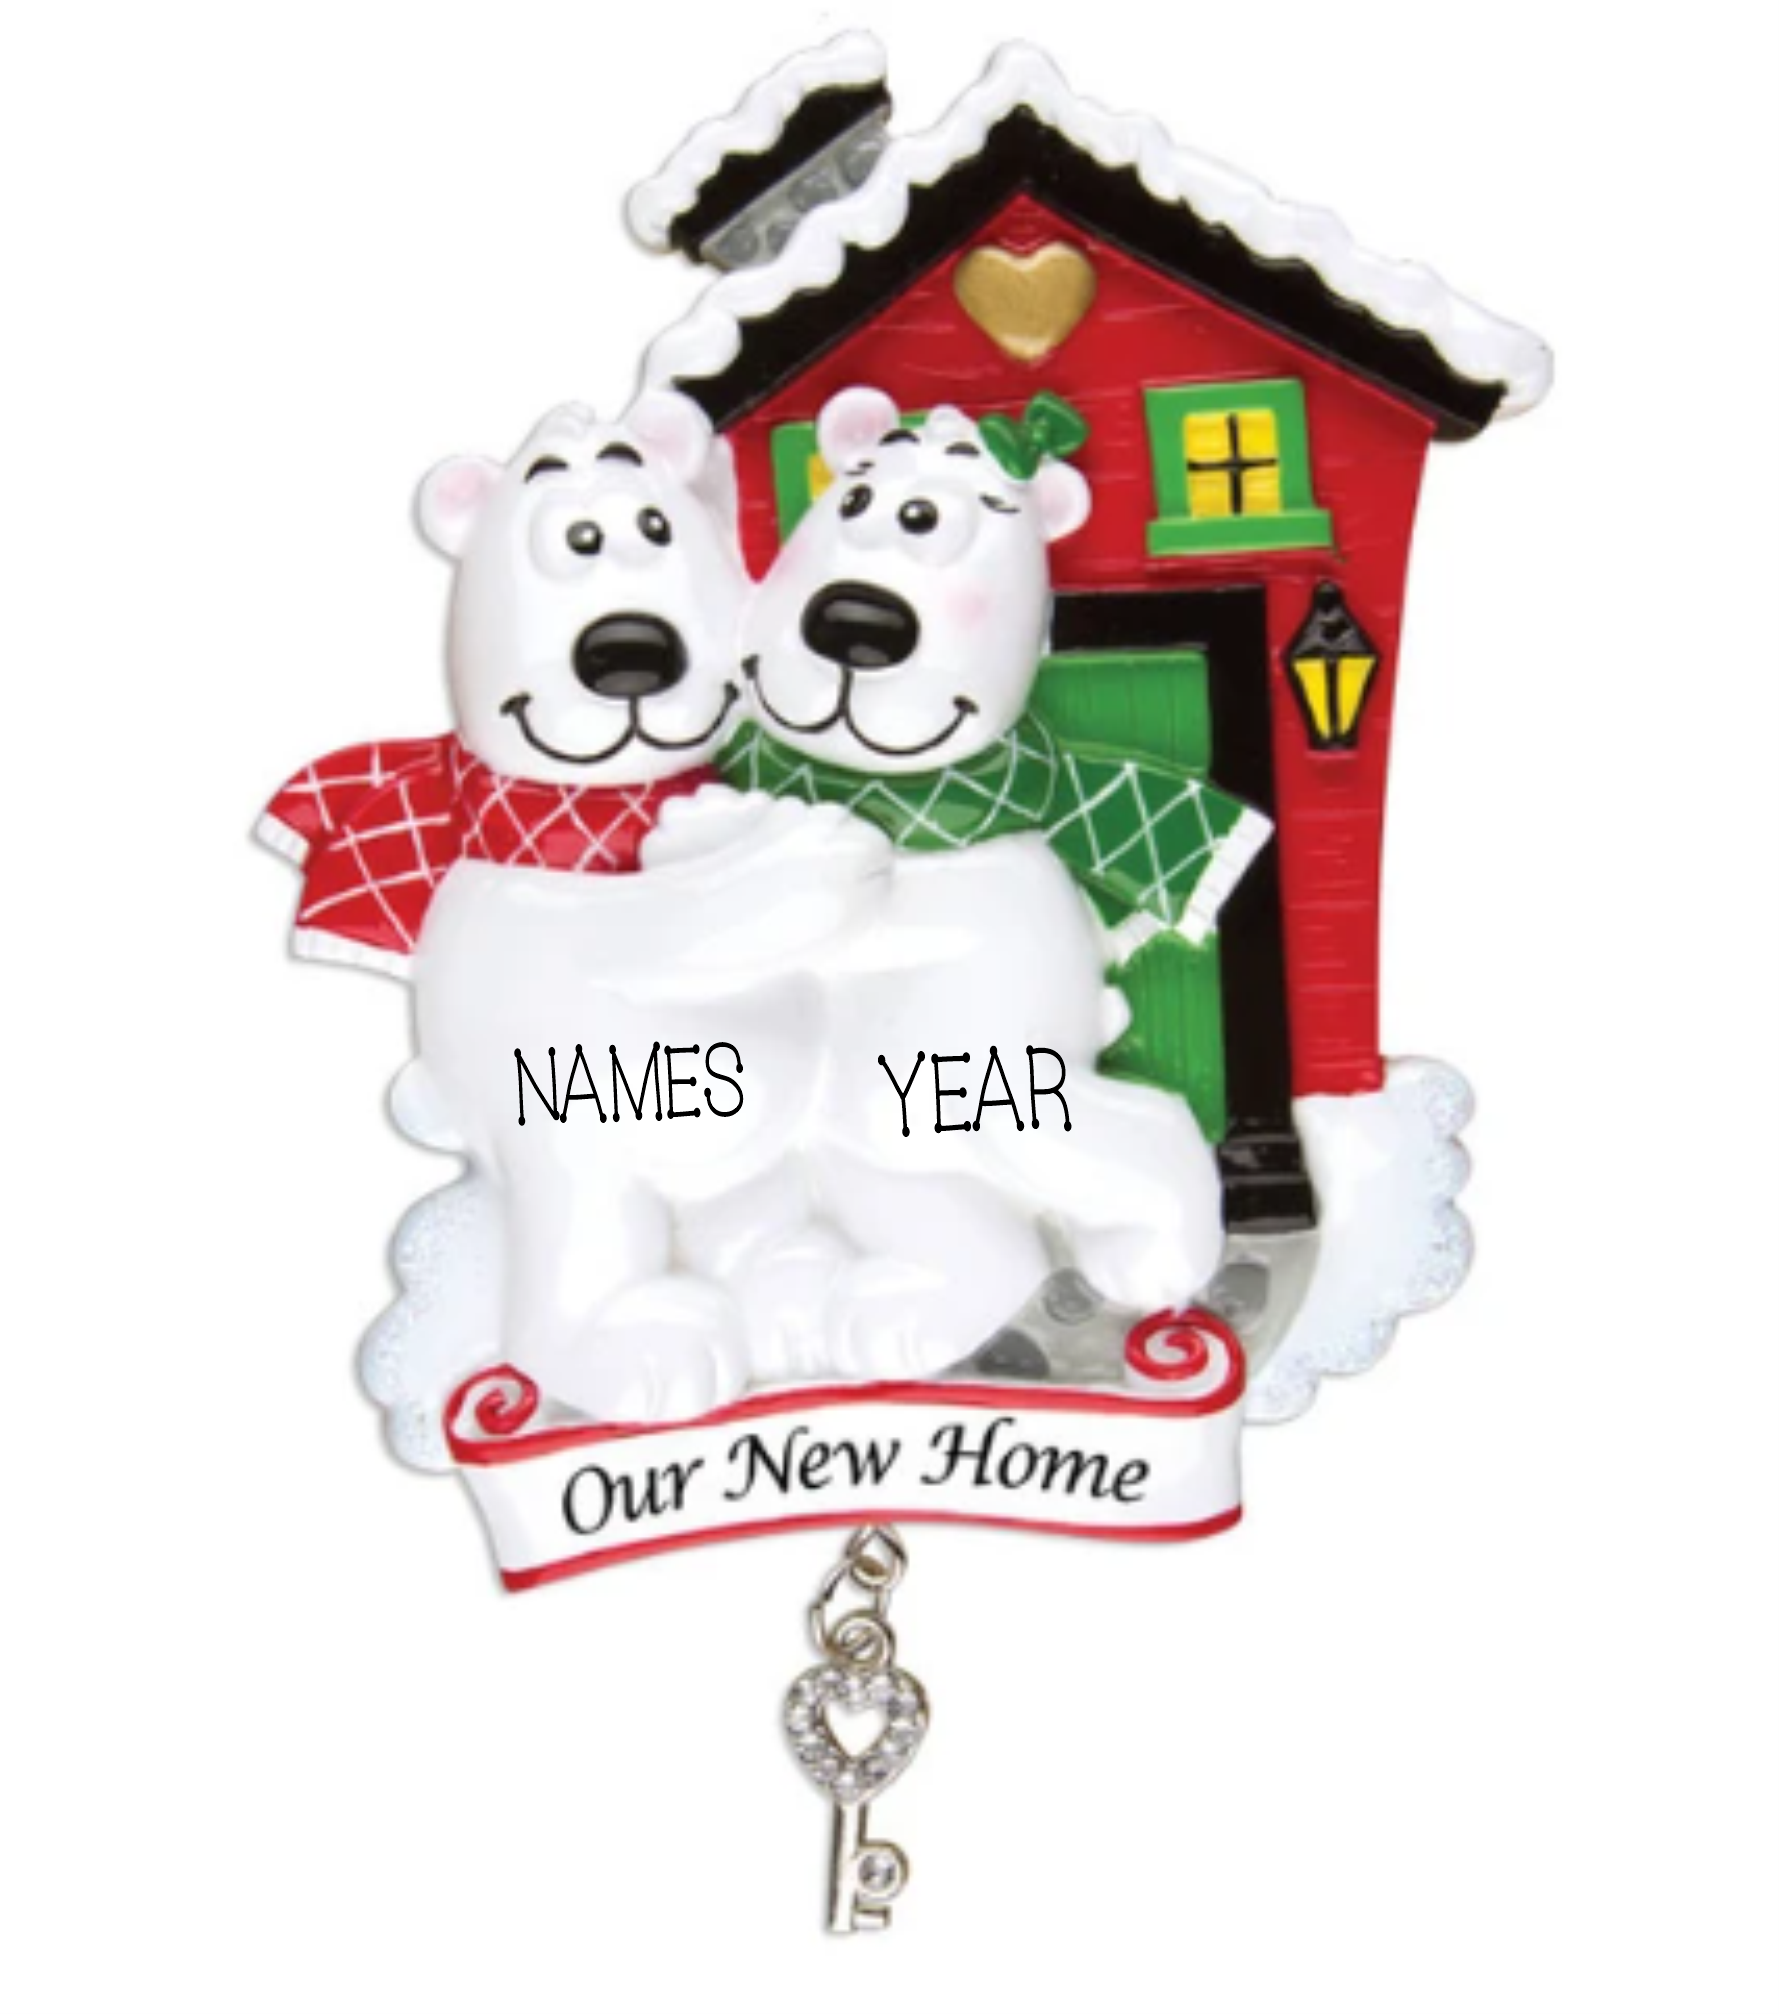 Our New Home Personalized Ornament